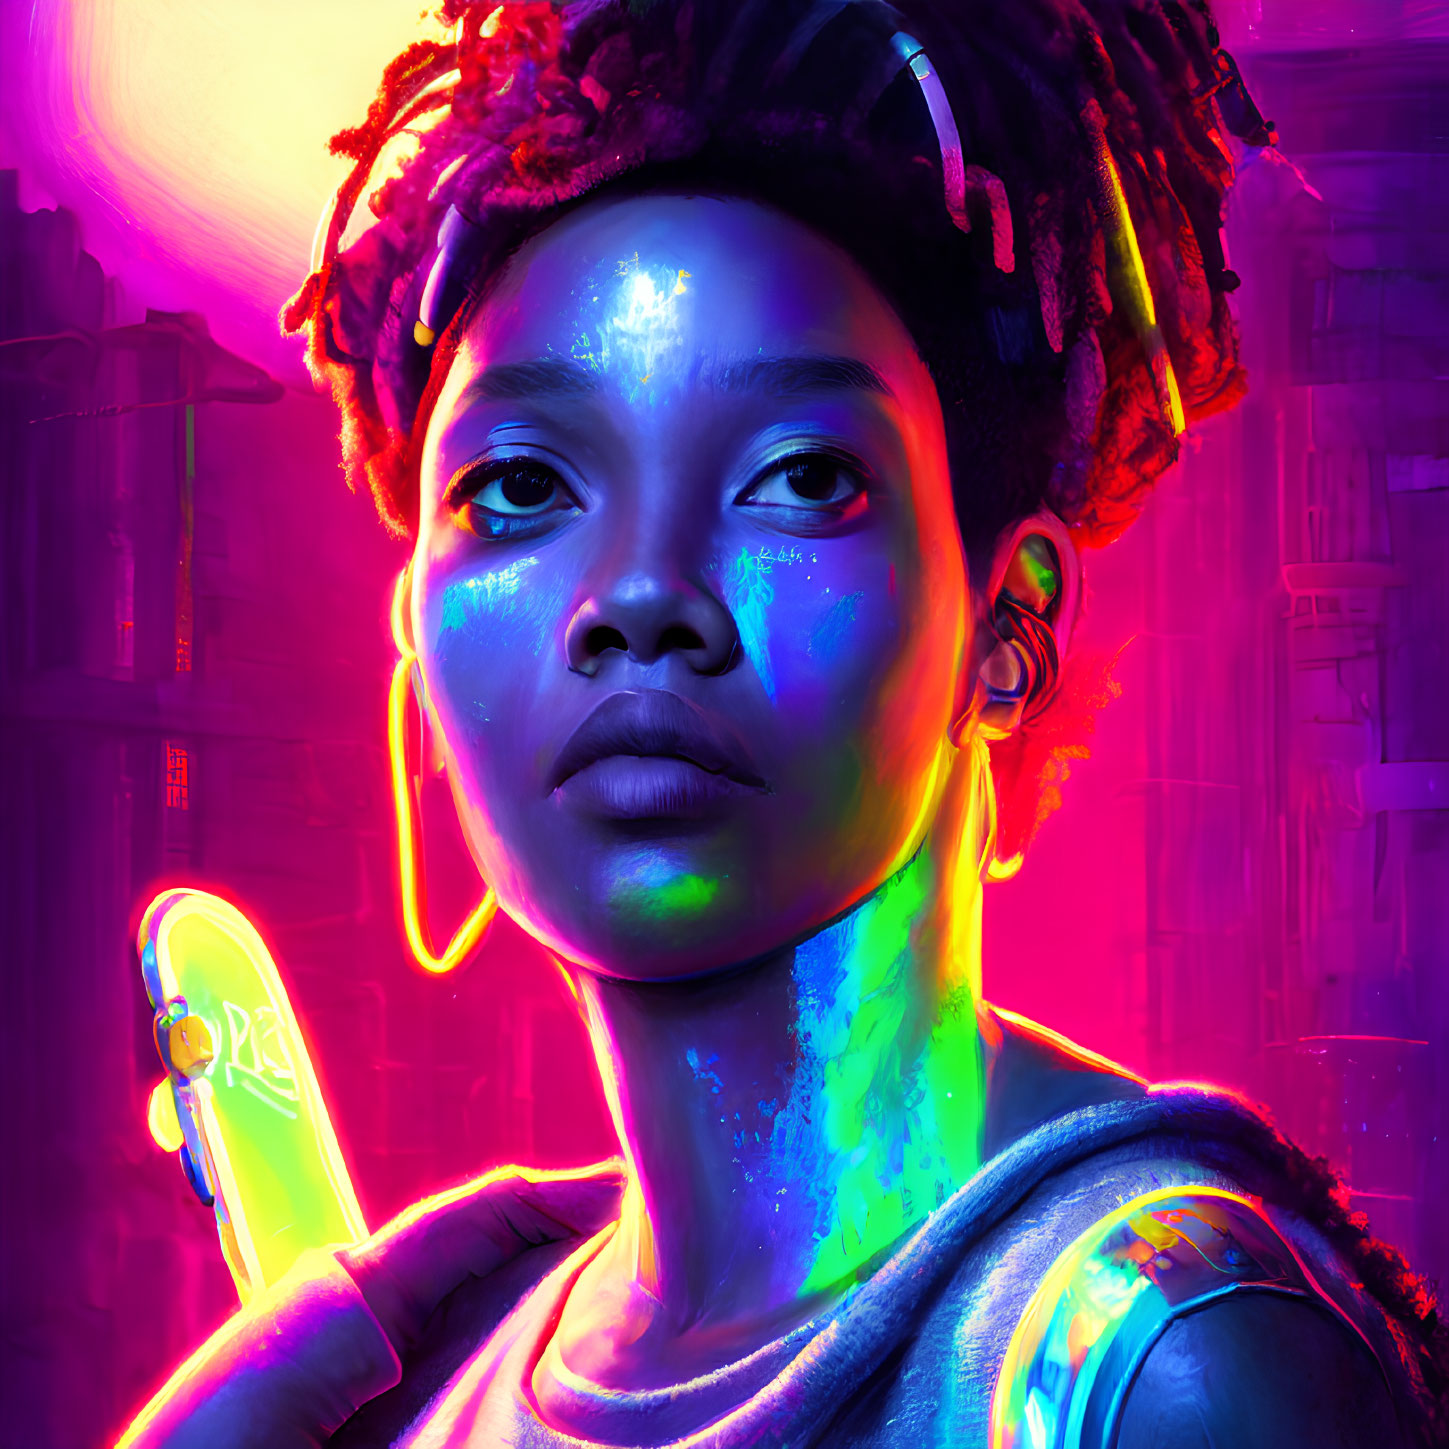 Colorful digital portrait with neon lights reflecting on person's face and urban background